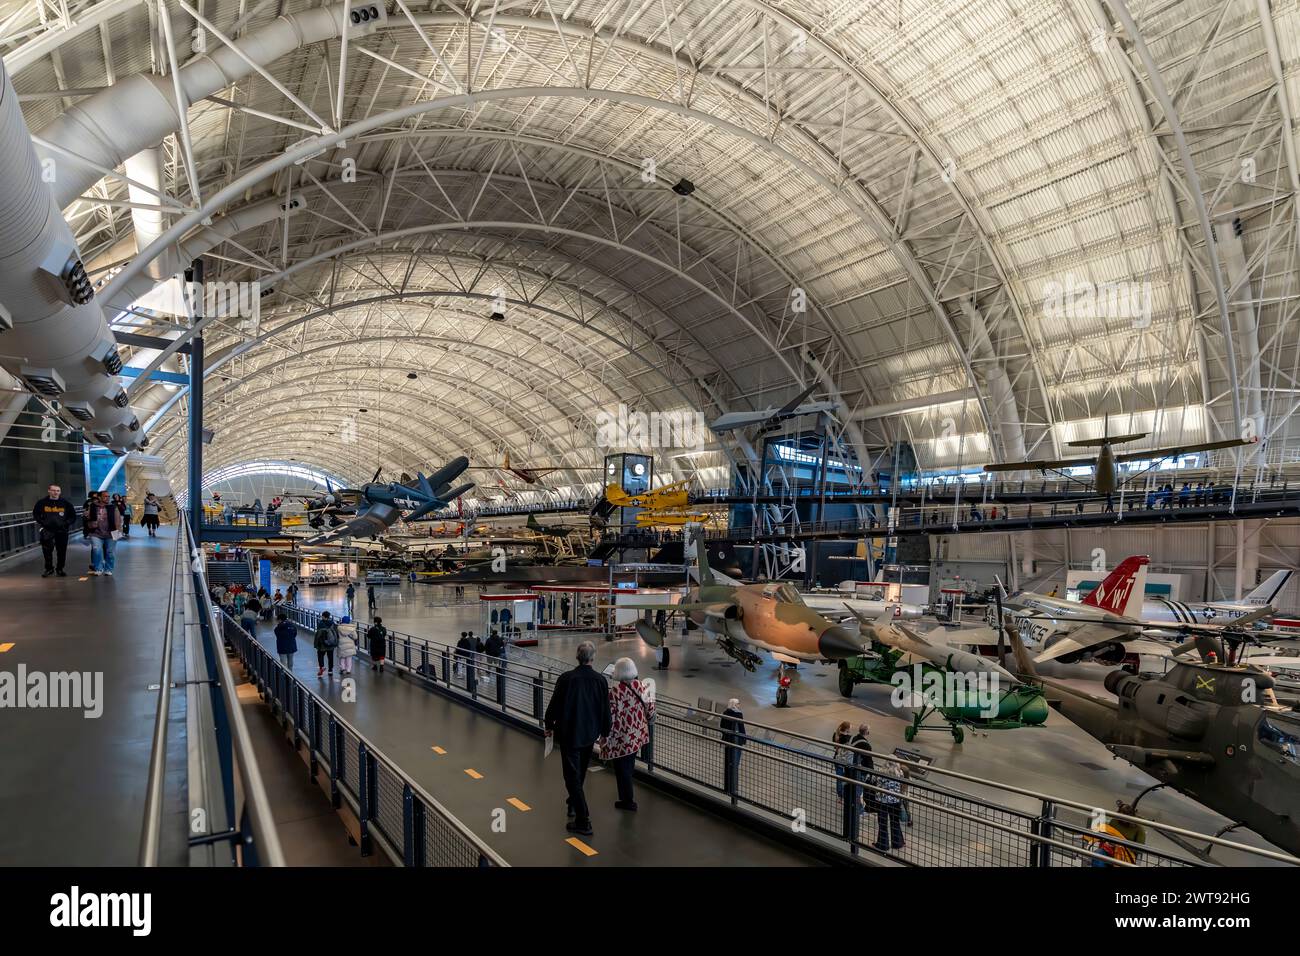 Visiting the National Air and Space Museum's Udvar-Hazy Center, home to aviation icons such as the Space Shuttle Discovery, the Concorde and the SR-71. Stock Photo